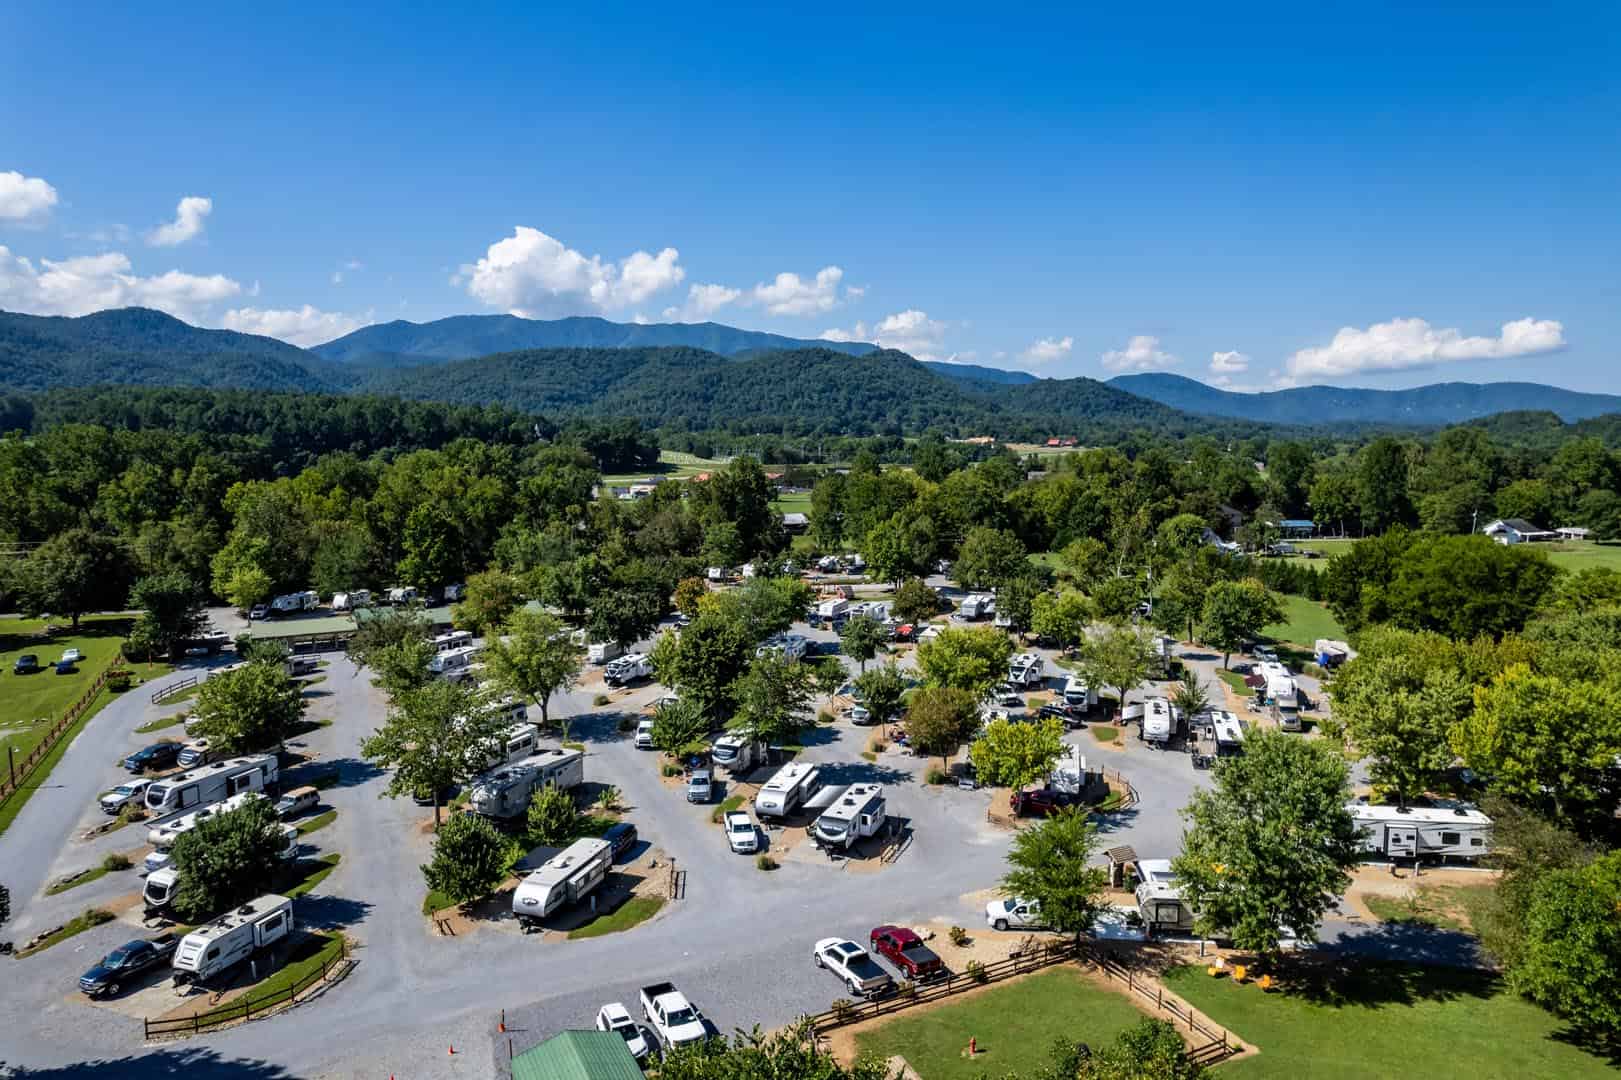 An aerial view of an rv park in the mountains.